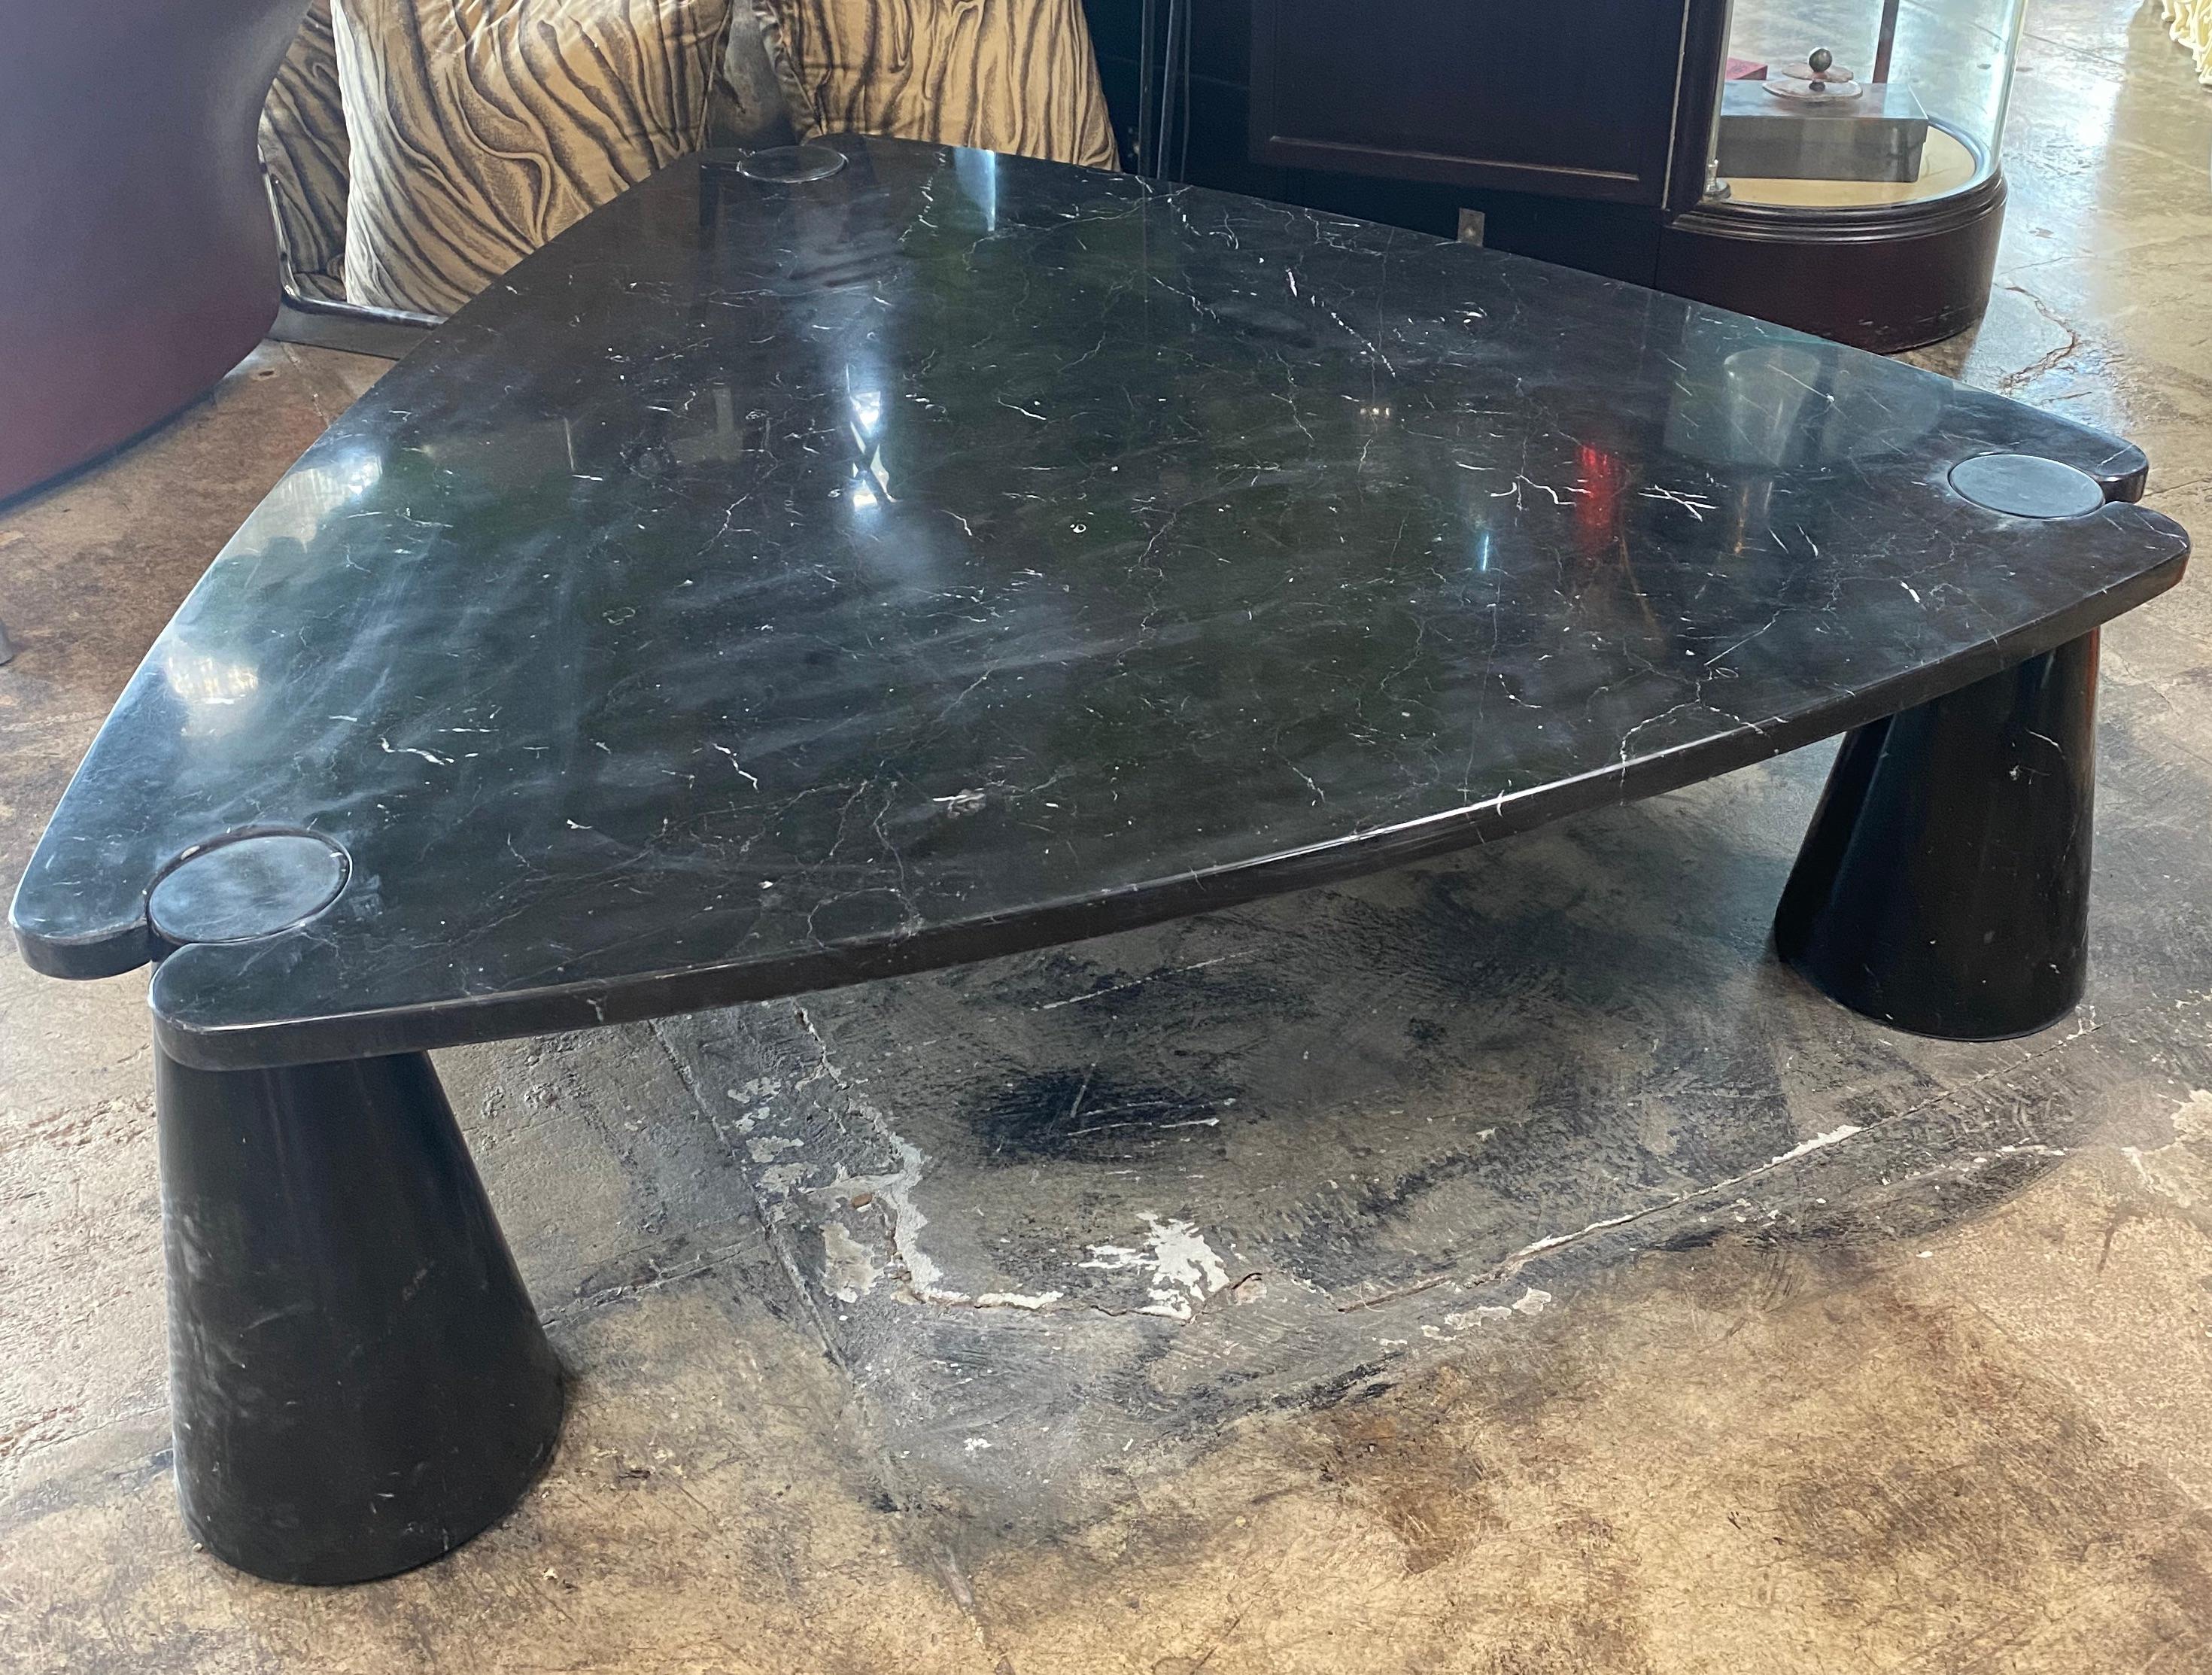 Oversize“Eros” series coffee table designed by Angelo Mangiarotti, made of Black Marquina marble, Italy 1970s.

Angelo Mangiarotti (1921-2012) was an Italian architect and Industrial designer with a reputation to mainly focus on the needs of the